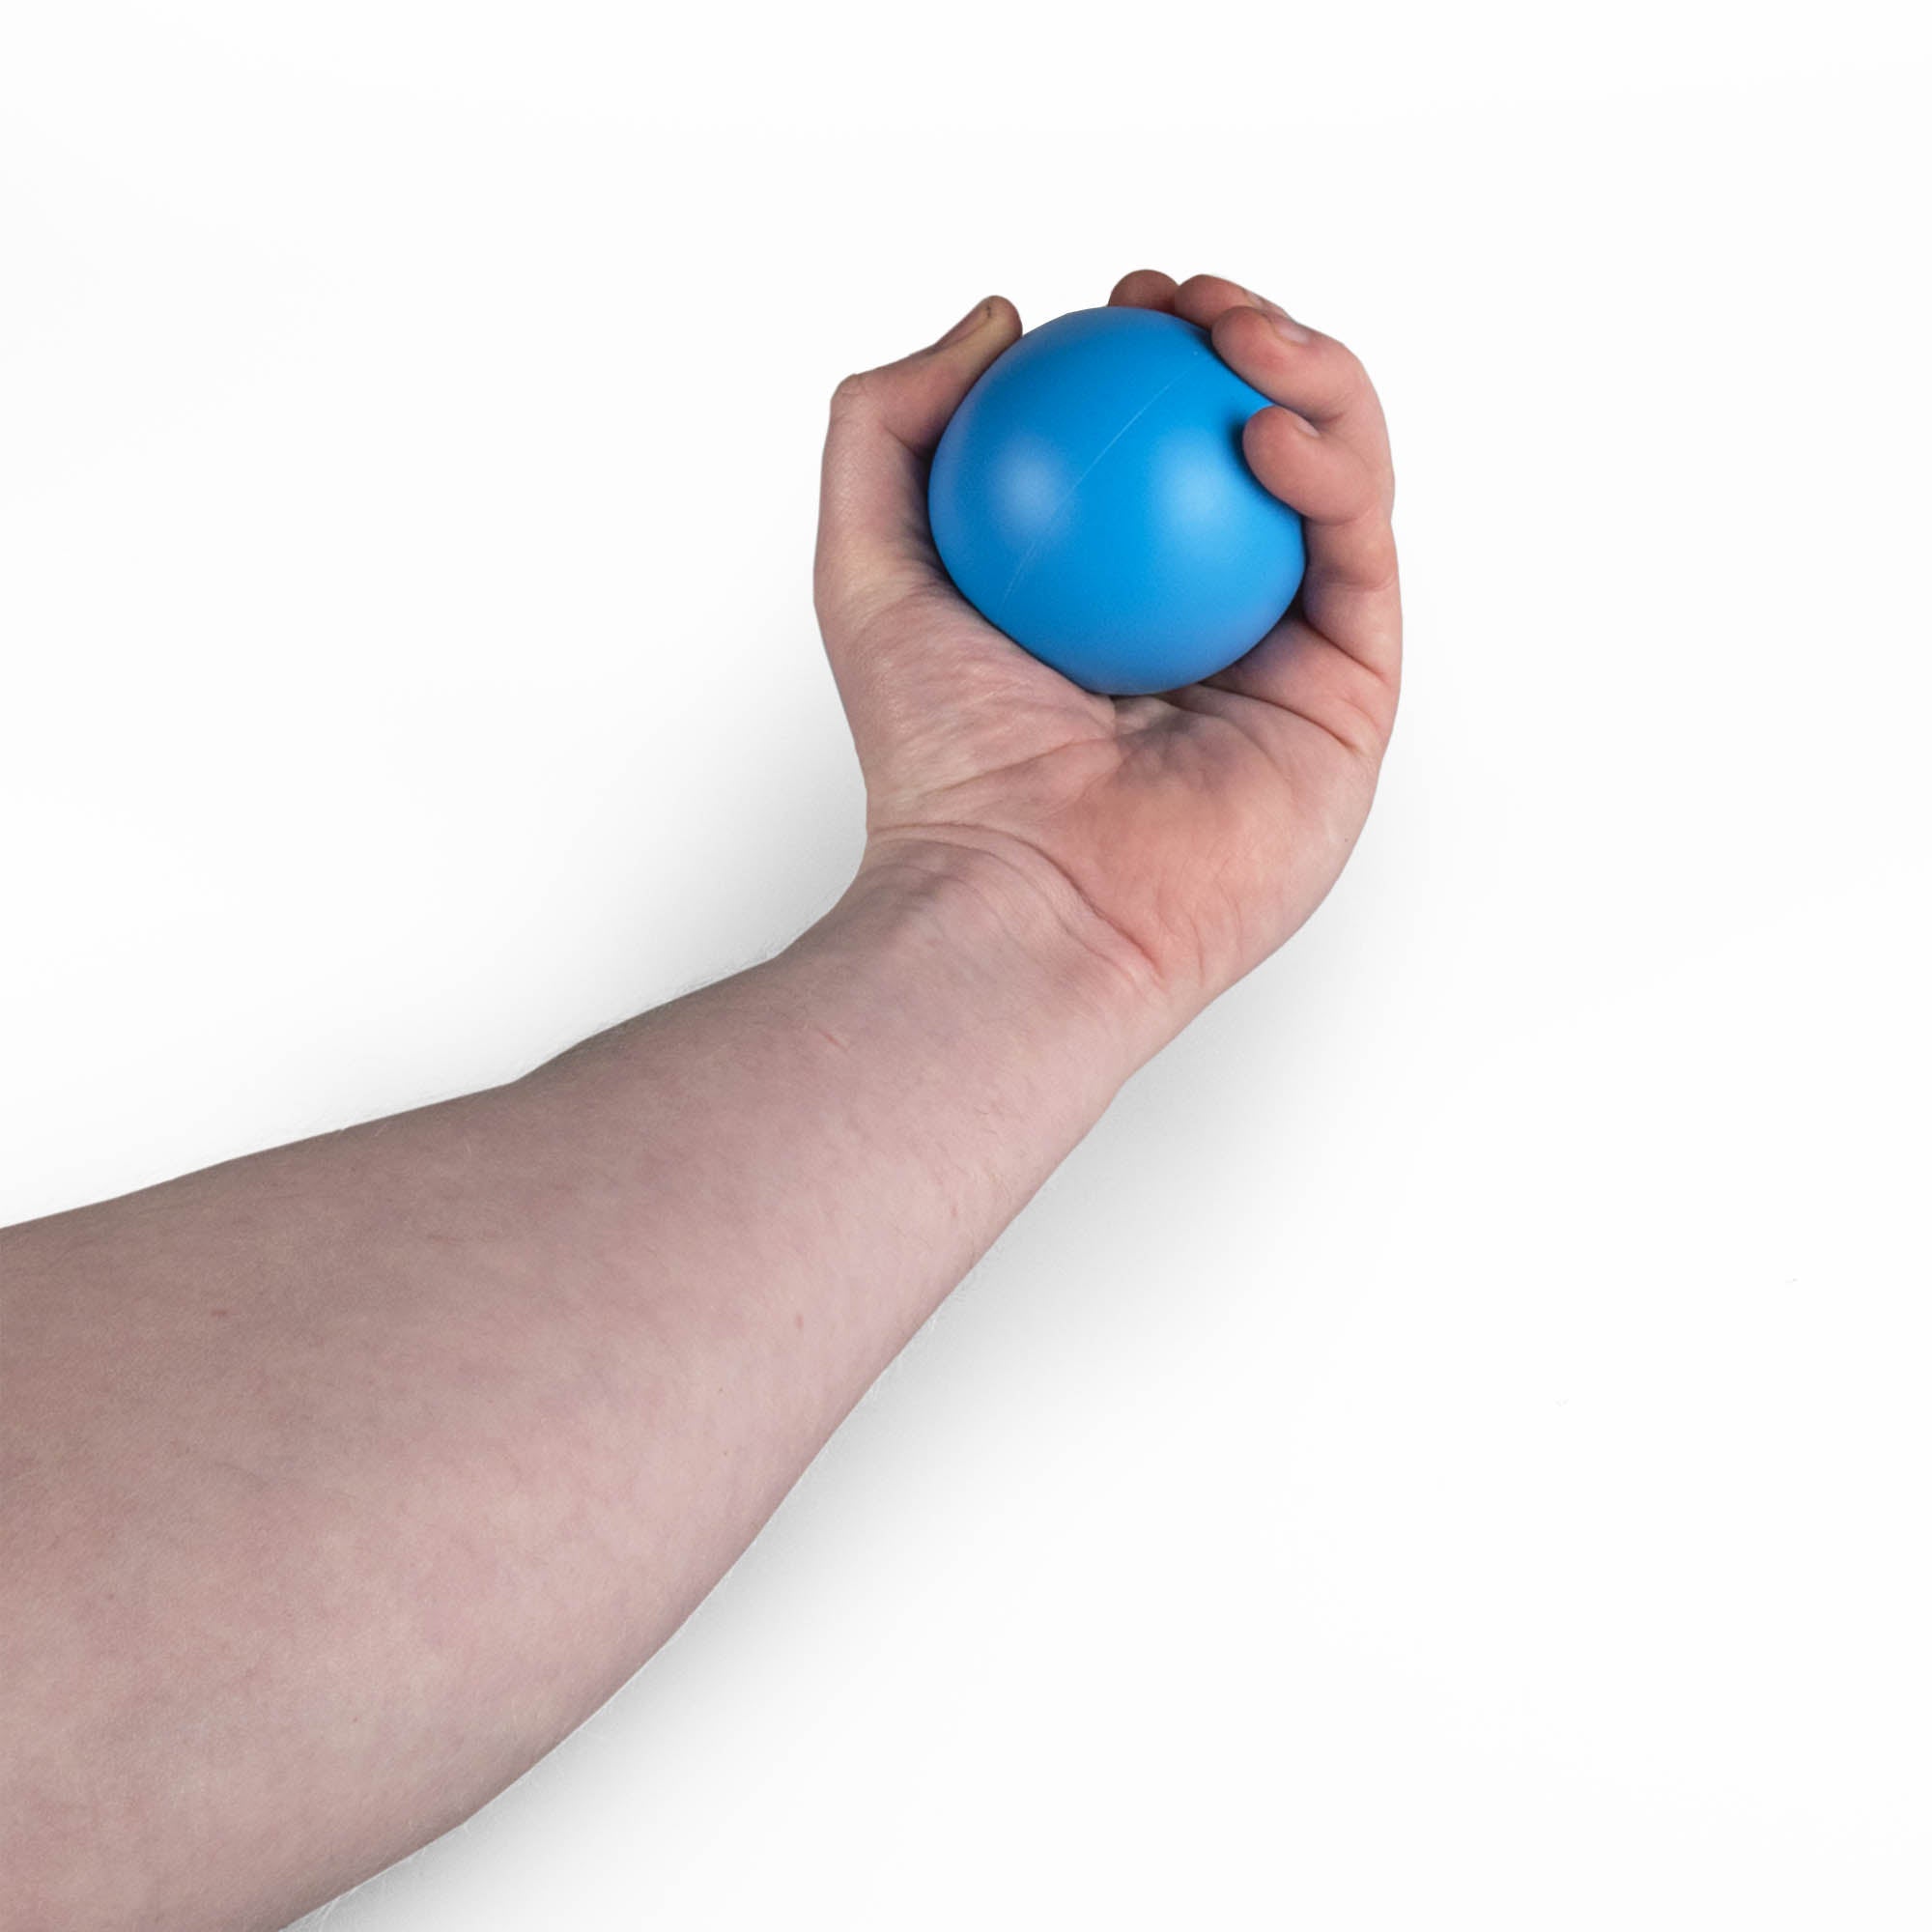 MMX 67mm juggling ball blue in hand